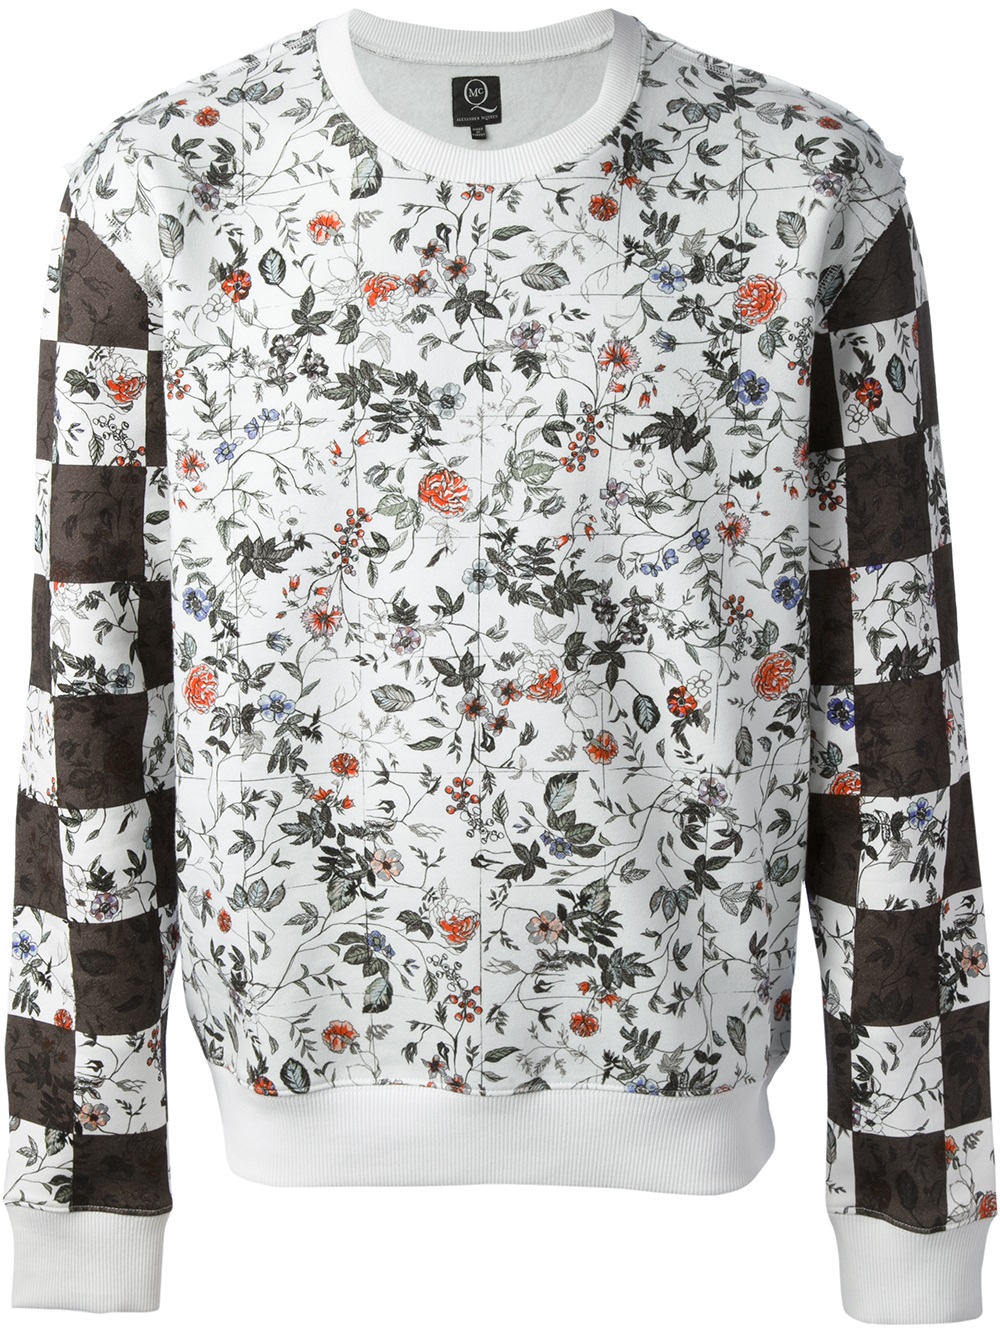 Lyst - Mcq Floral Sweater in White for Men